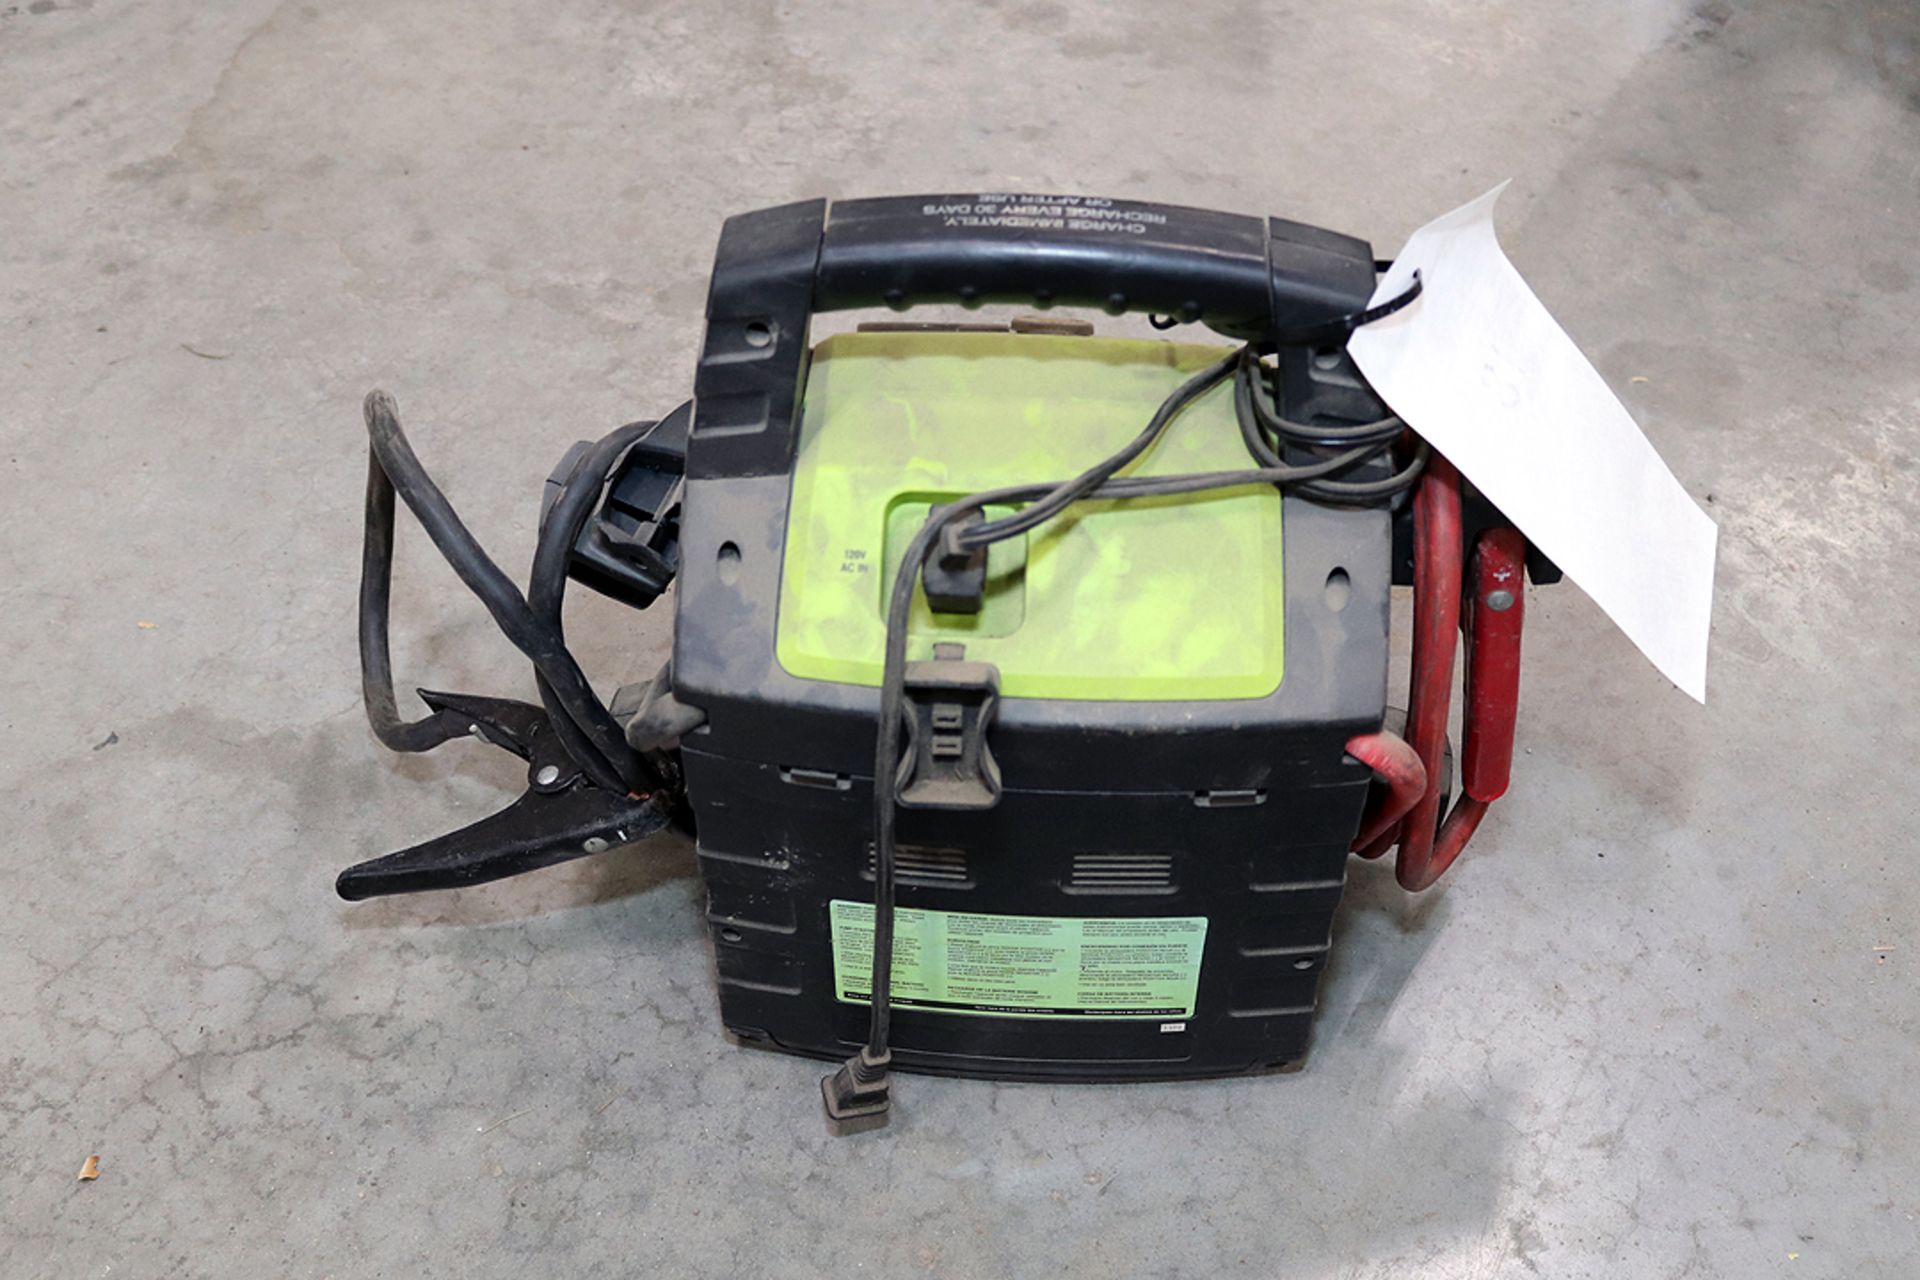 EarthWay Ev-N-Spred Spreader for ATV, Rescue Portable Power Pack and Soldering Gun - Image 7 of 7